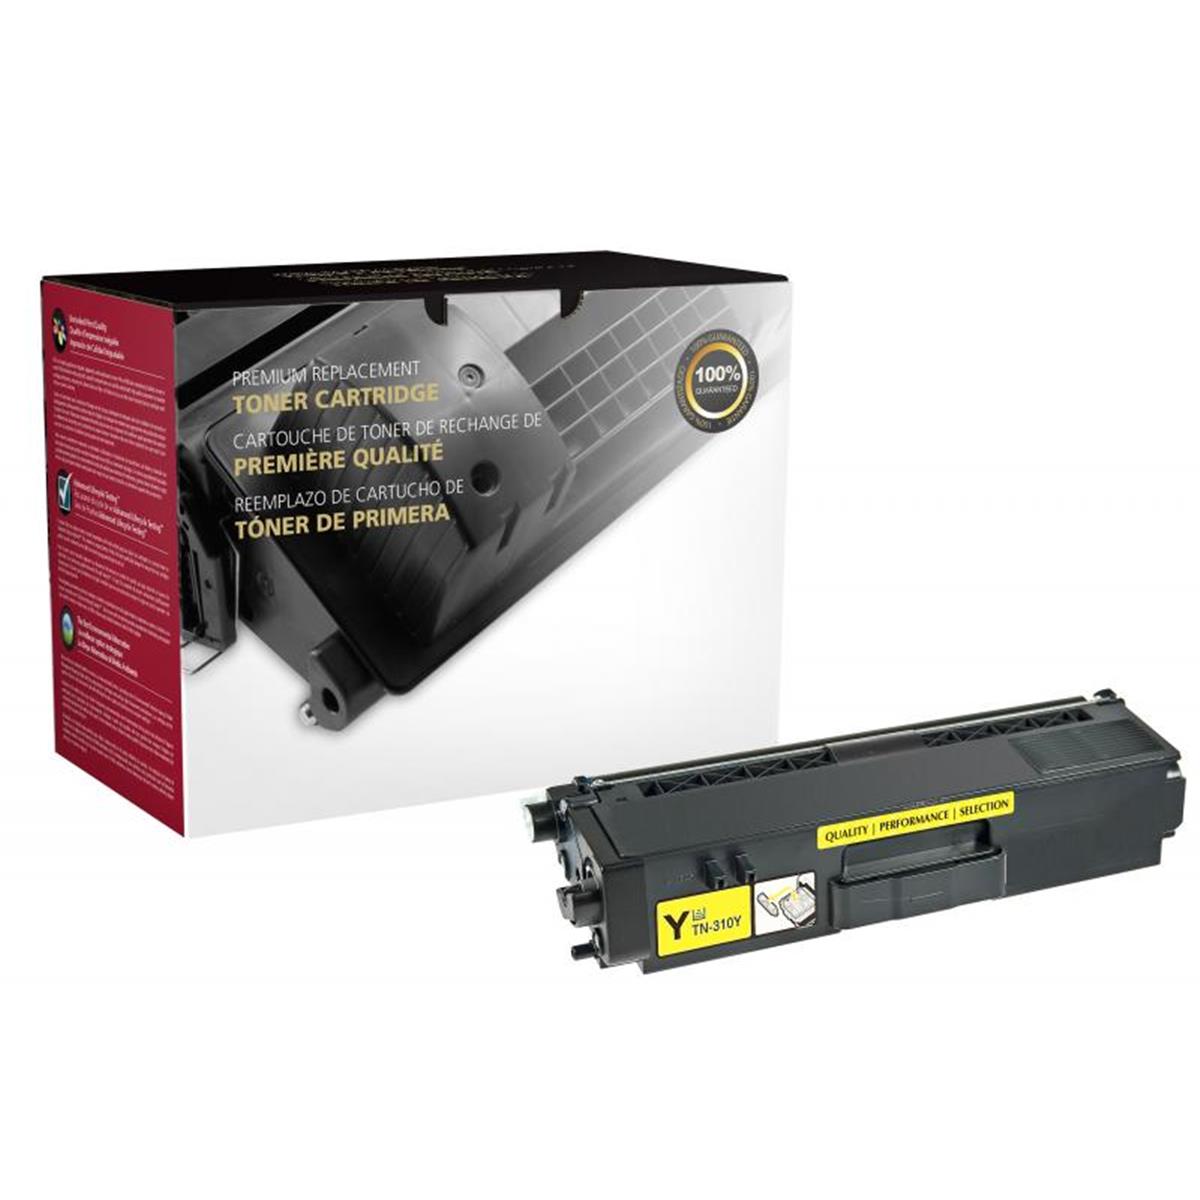 Picture of Brother 200595 Yellow Toner Cartridge for TN310